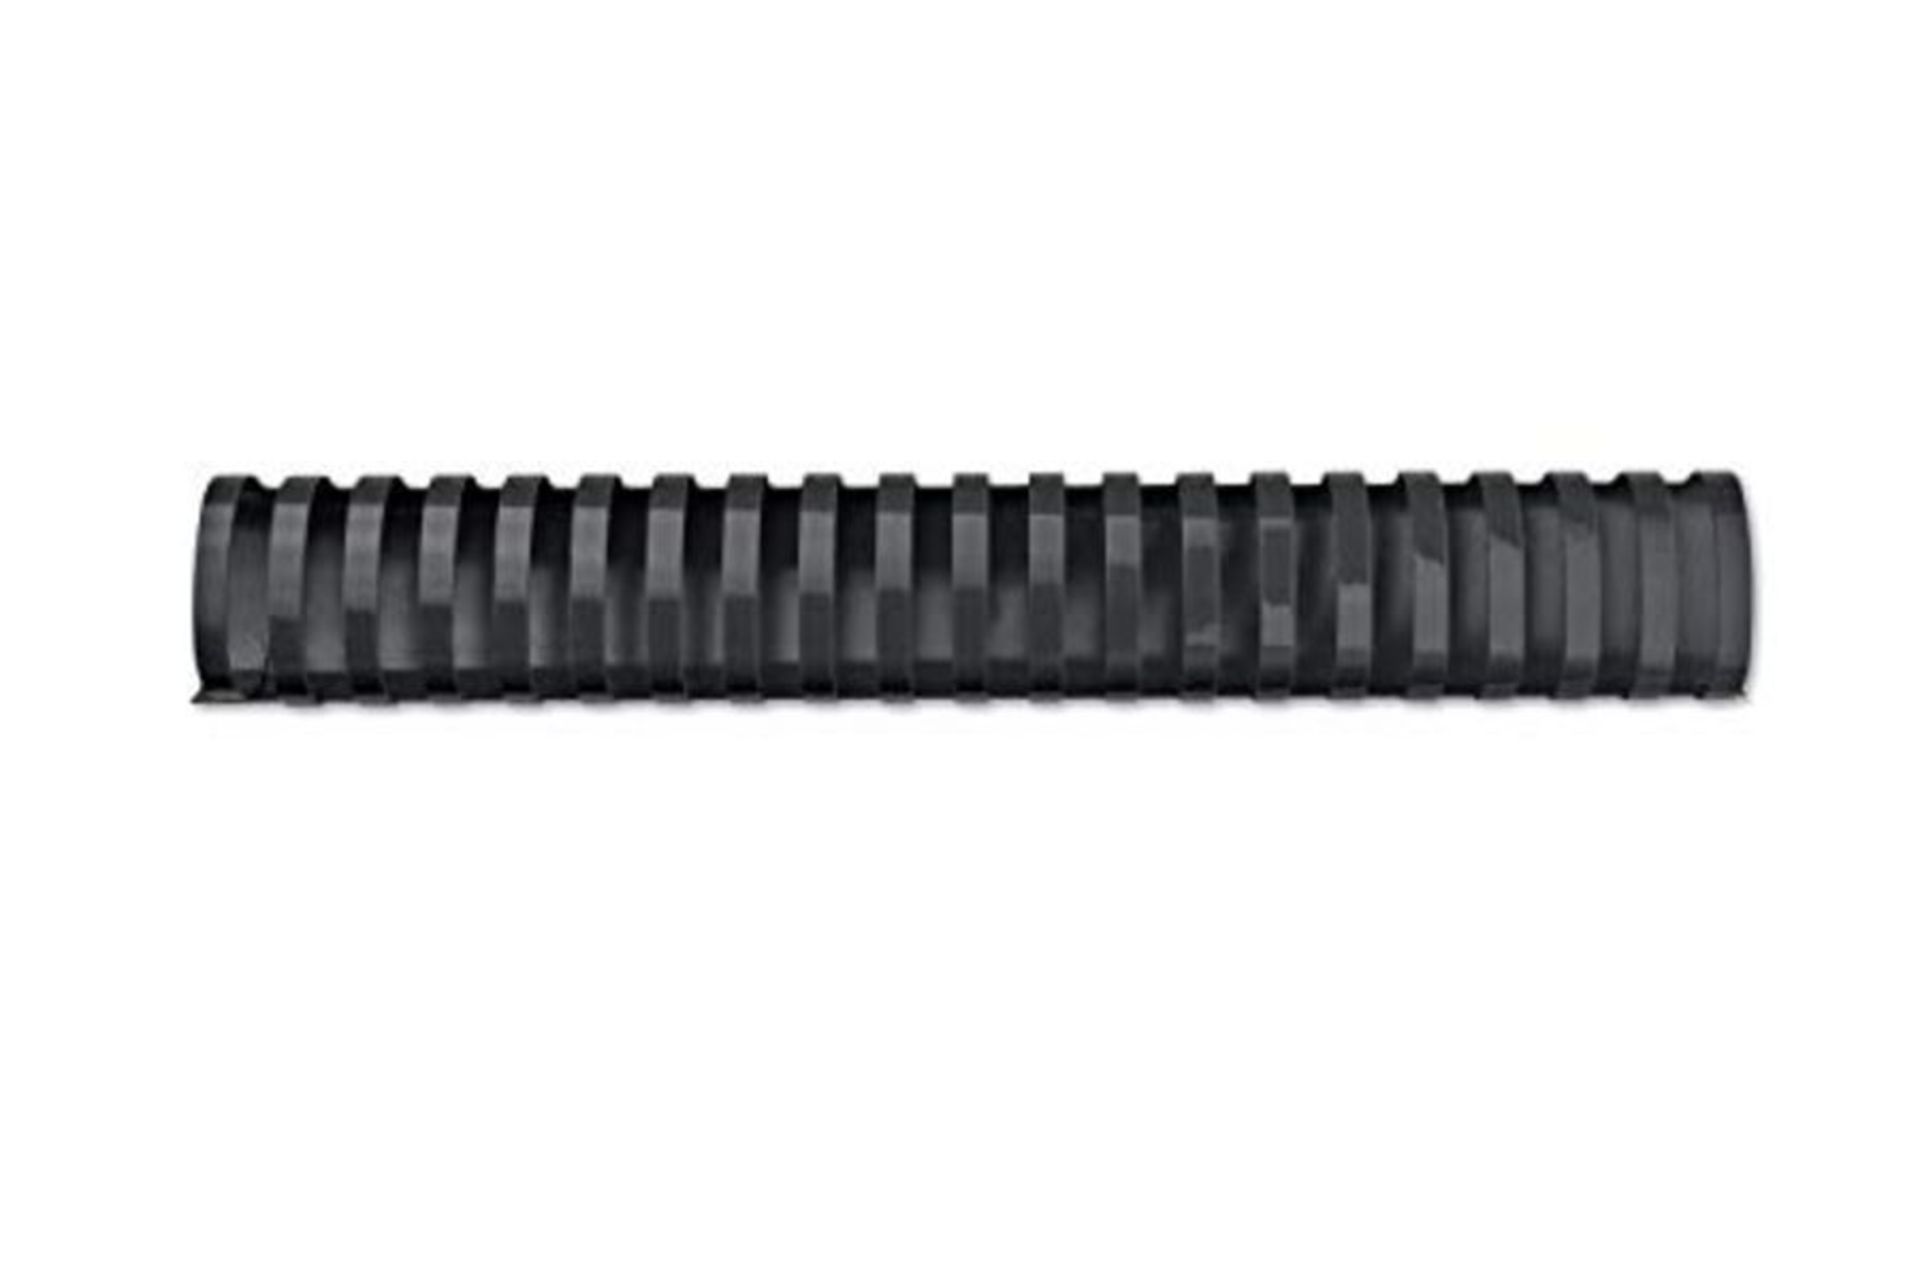 GBC CombBind Binding Combs, 38 mm, 330 Sheet Capacity, A4, 21 Ring, Black, Pack of 50, - Image 4 of 6